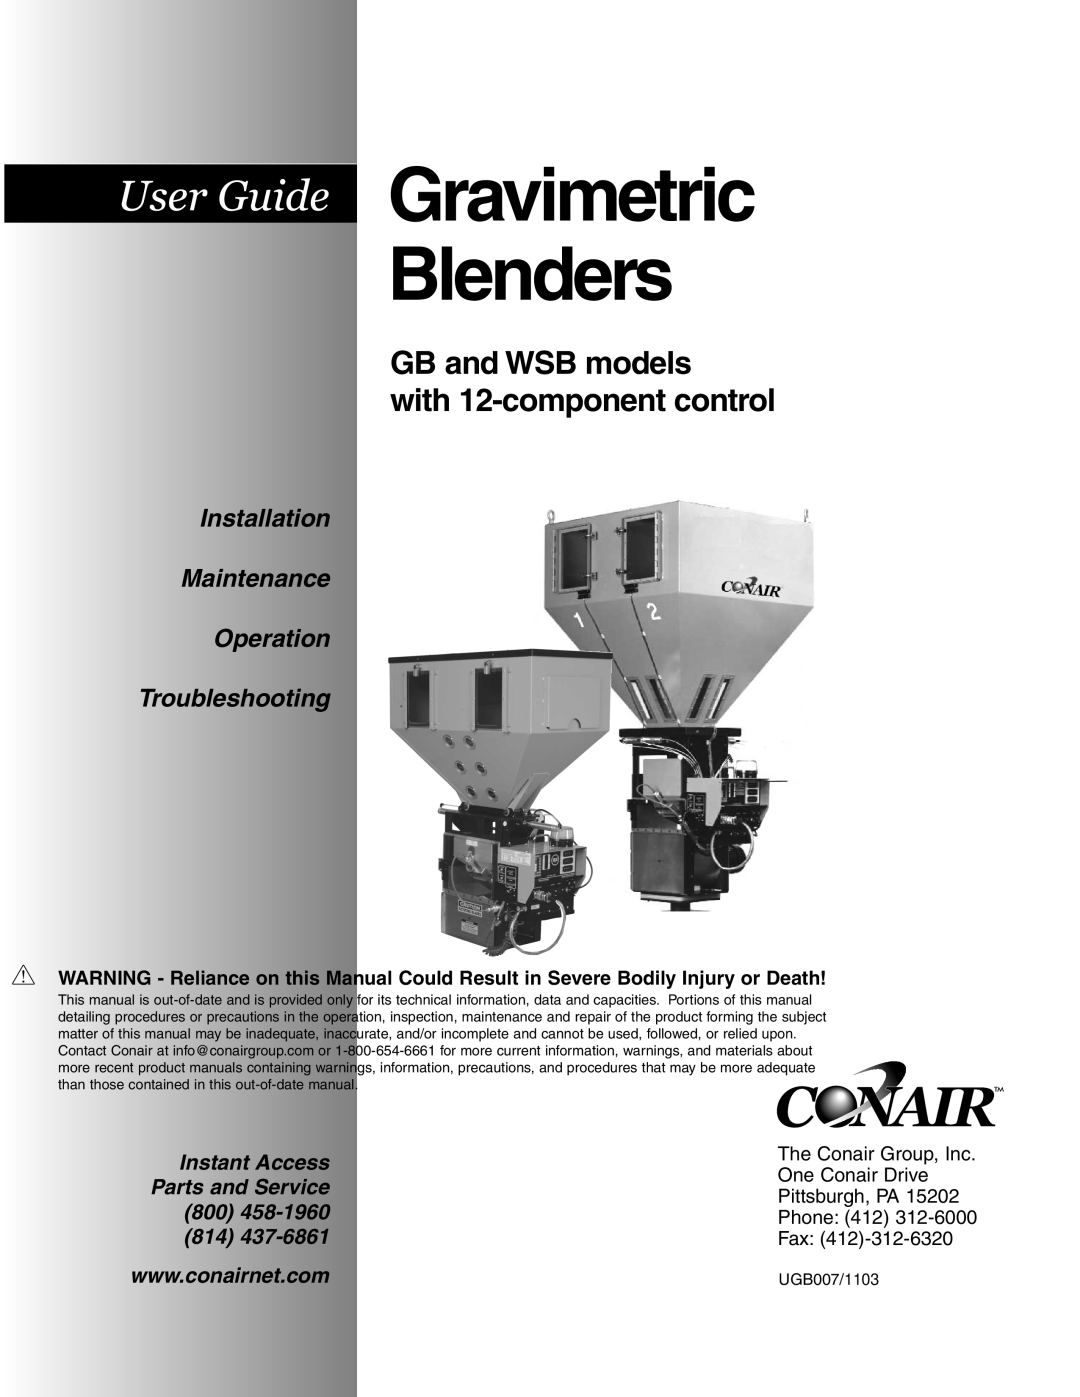 Conair manual GB and WSB models with 12-componentcontrol, Gravimetric Blenders, Installation Maintenance Operation, Fax 